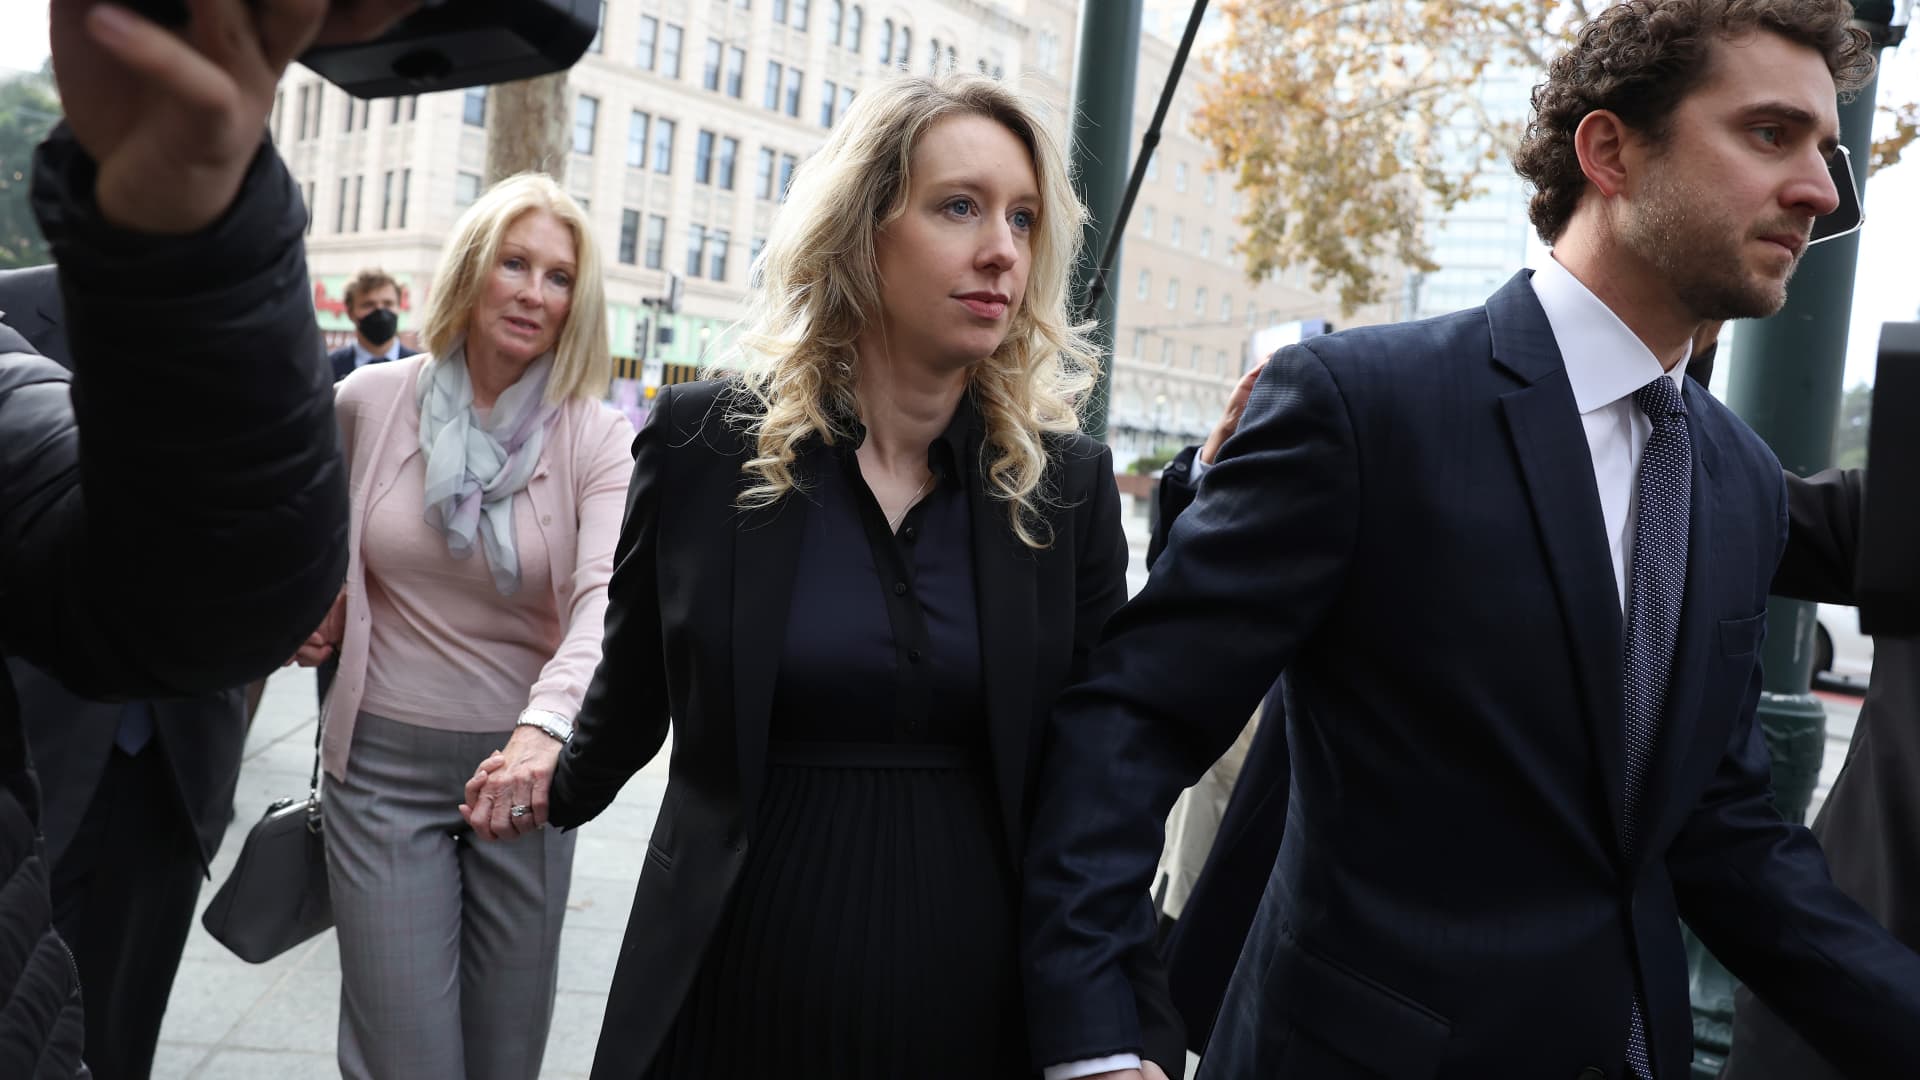 Disgraced Theranos CEO Elizabeth Holmes will report to jail on May 30